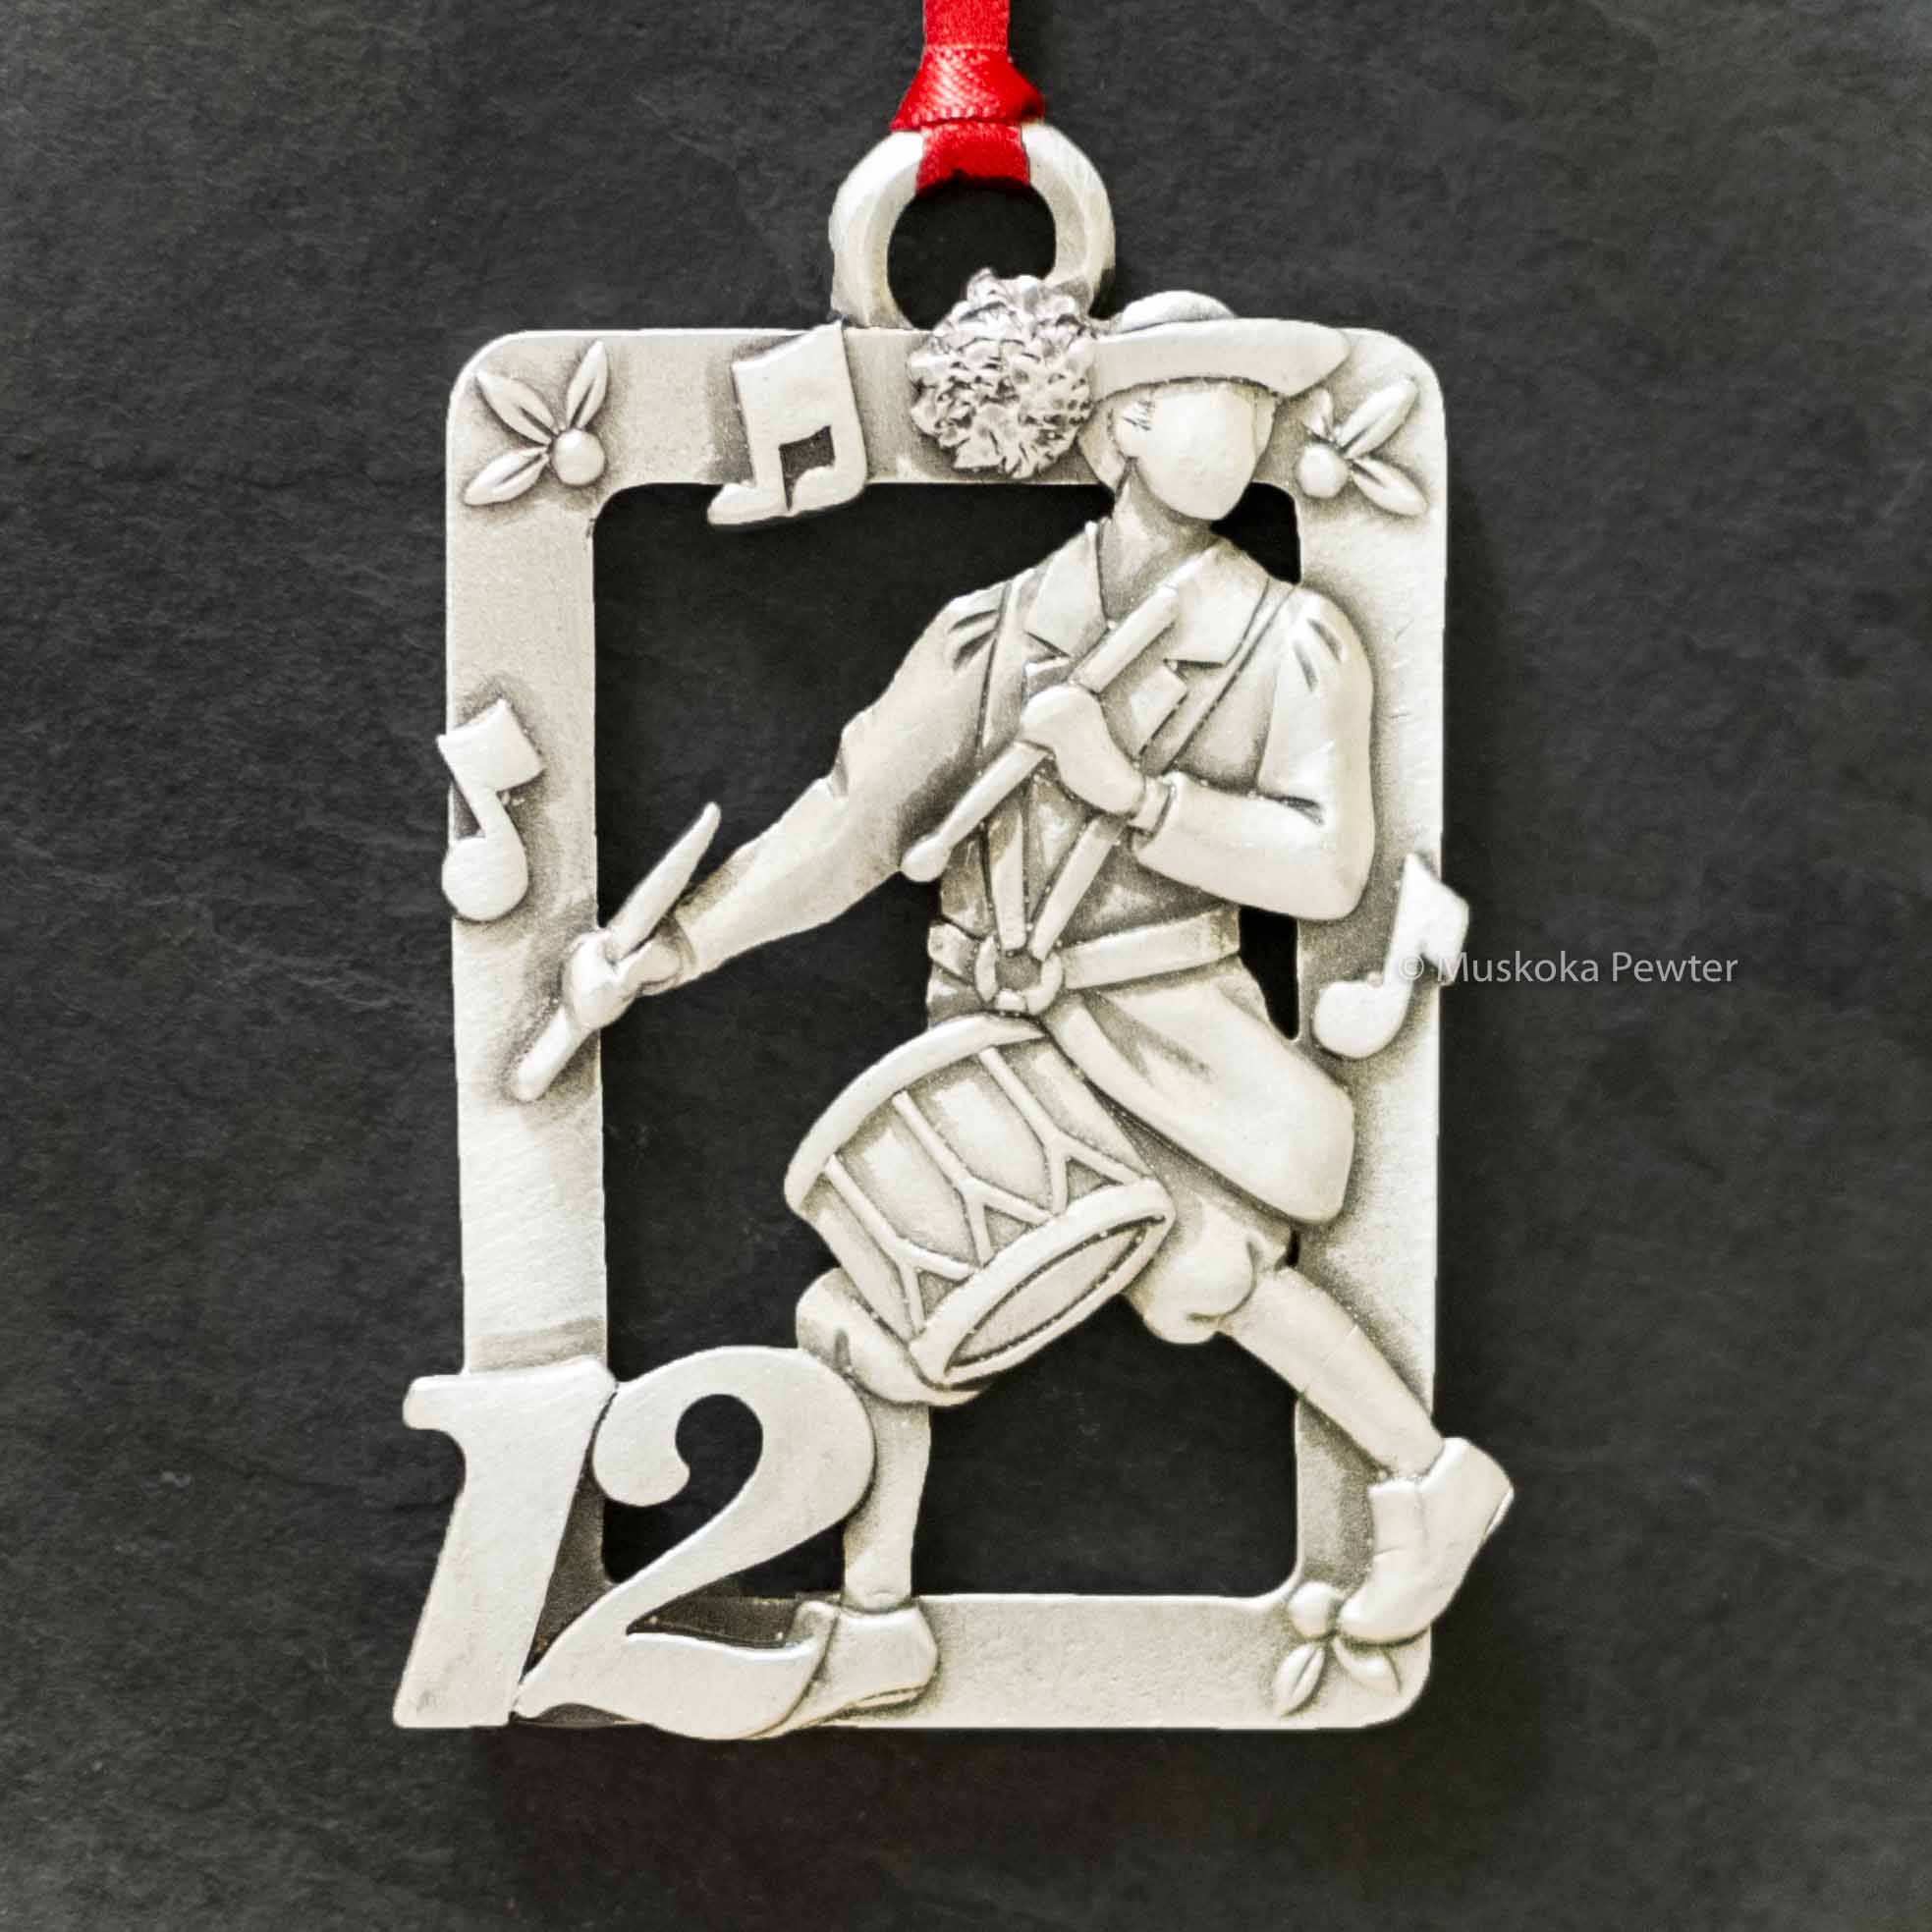 English Pewter Company 12 Days of Christmas Luxury Pewter Christmas Tree Decoration Pendant Baubles Ornament CHR011 1st Day